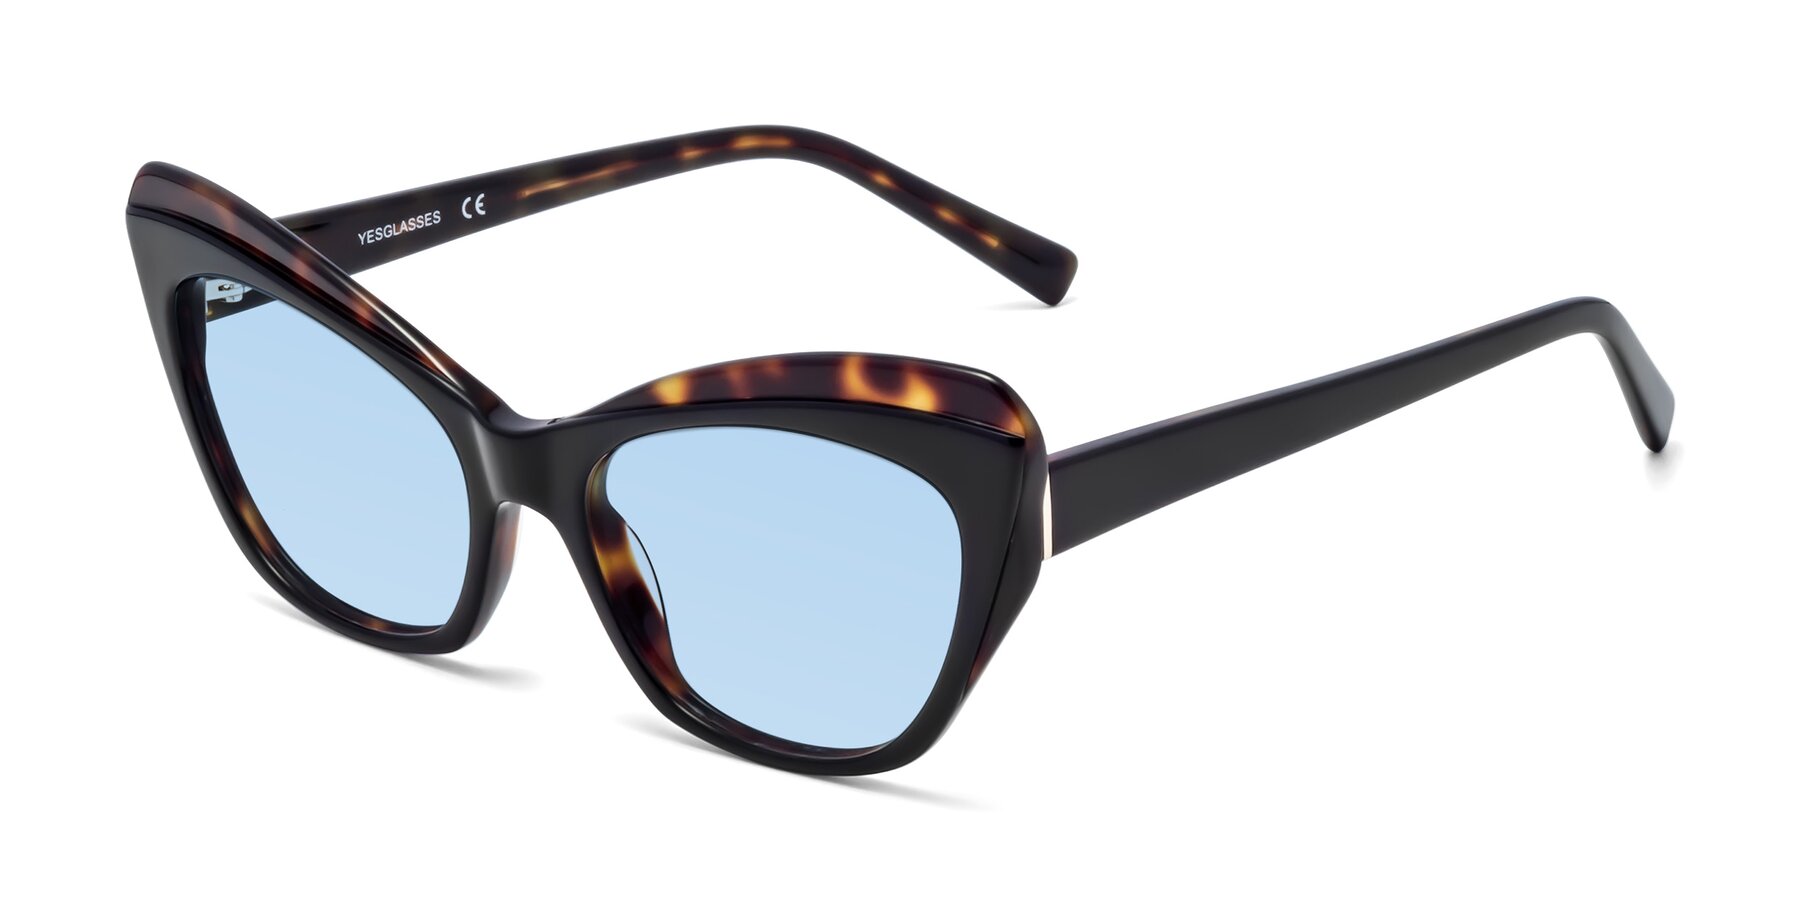 Angle of 1469 in Black-Tortoise with Light Blue Tinted Lenses